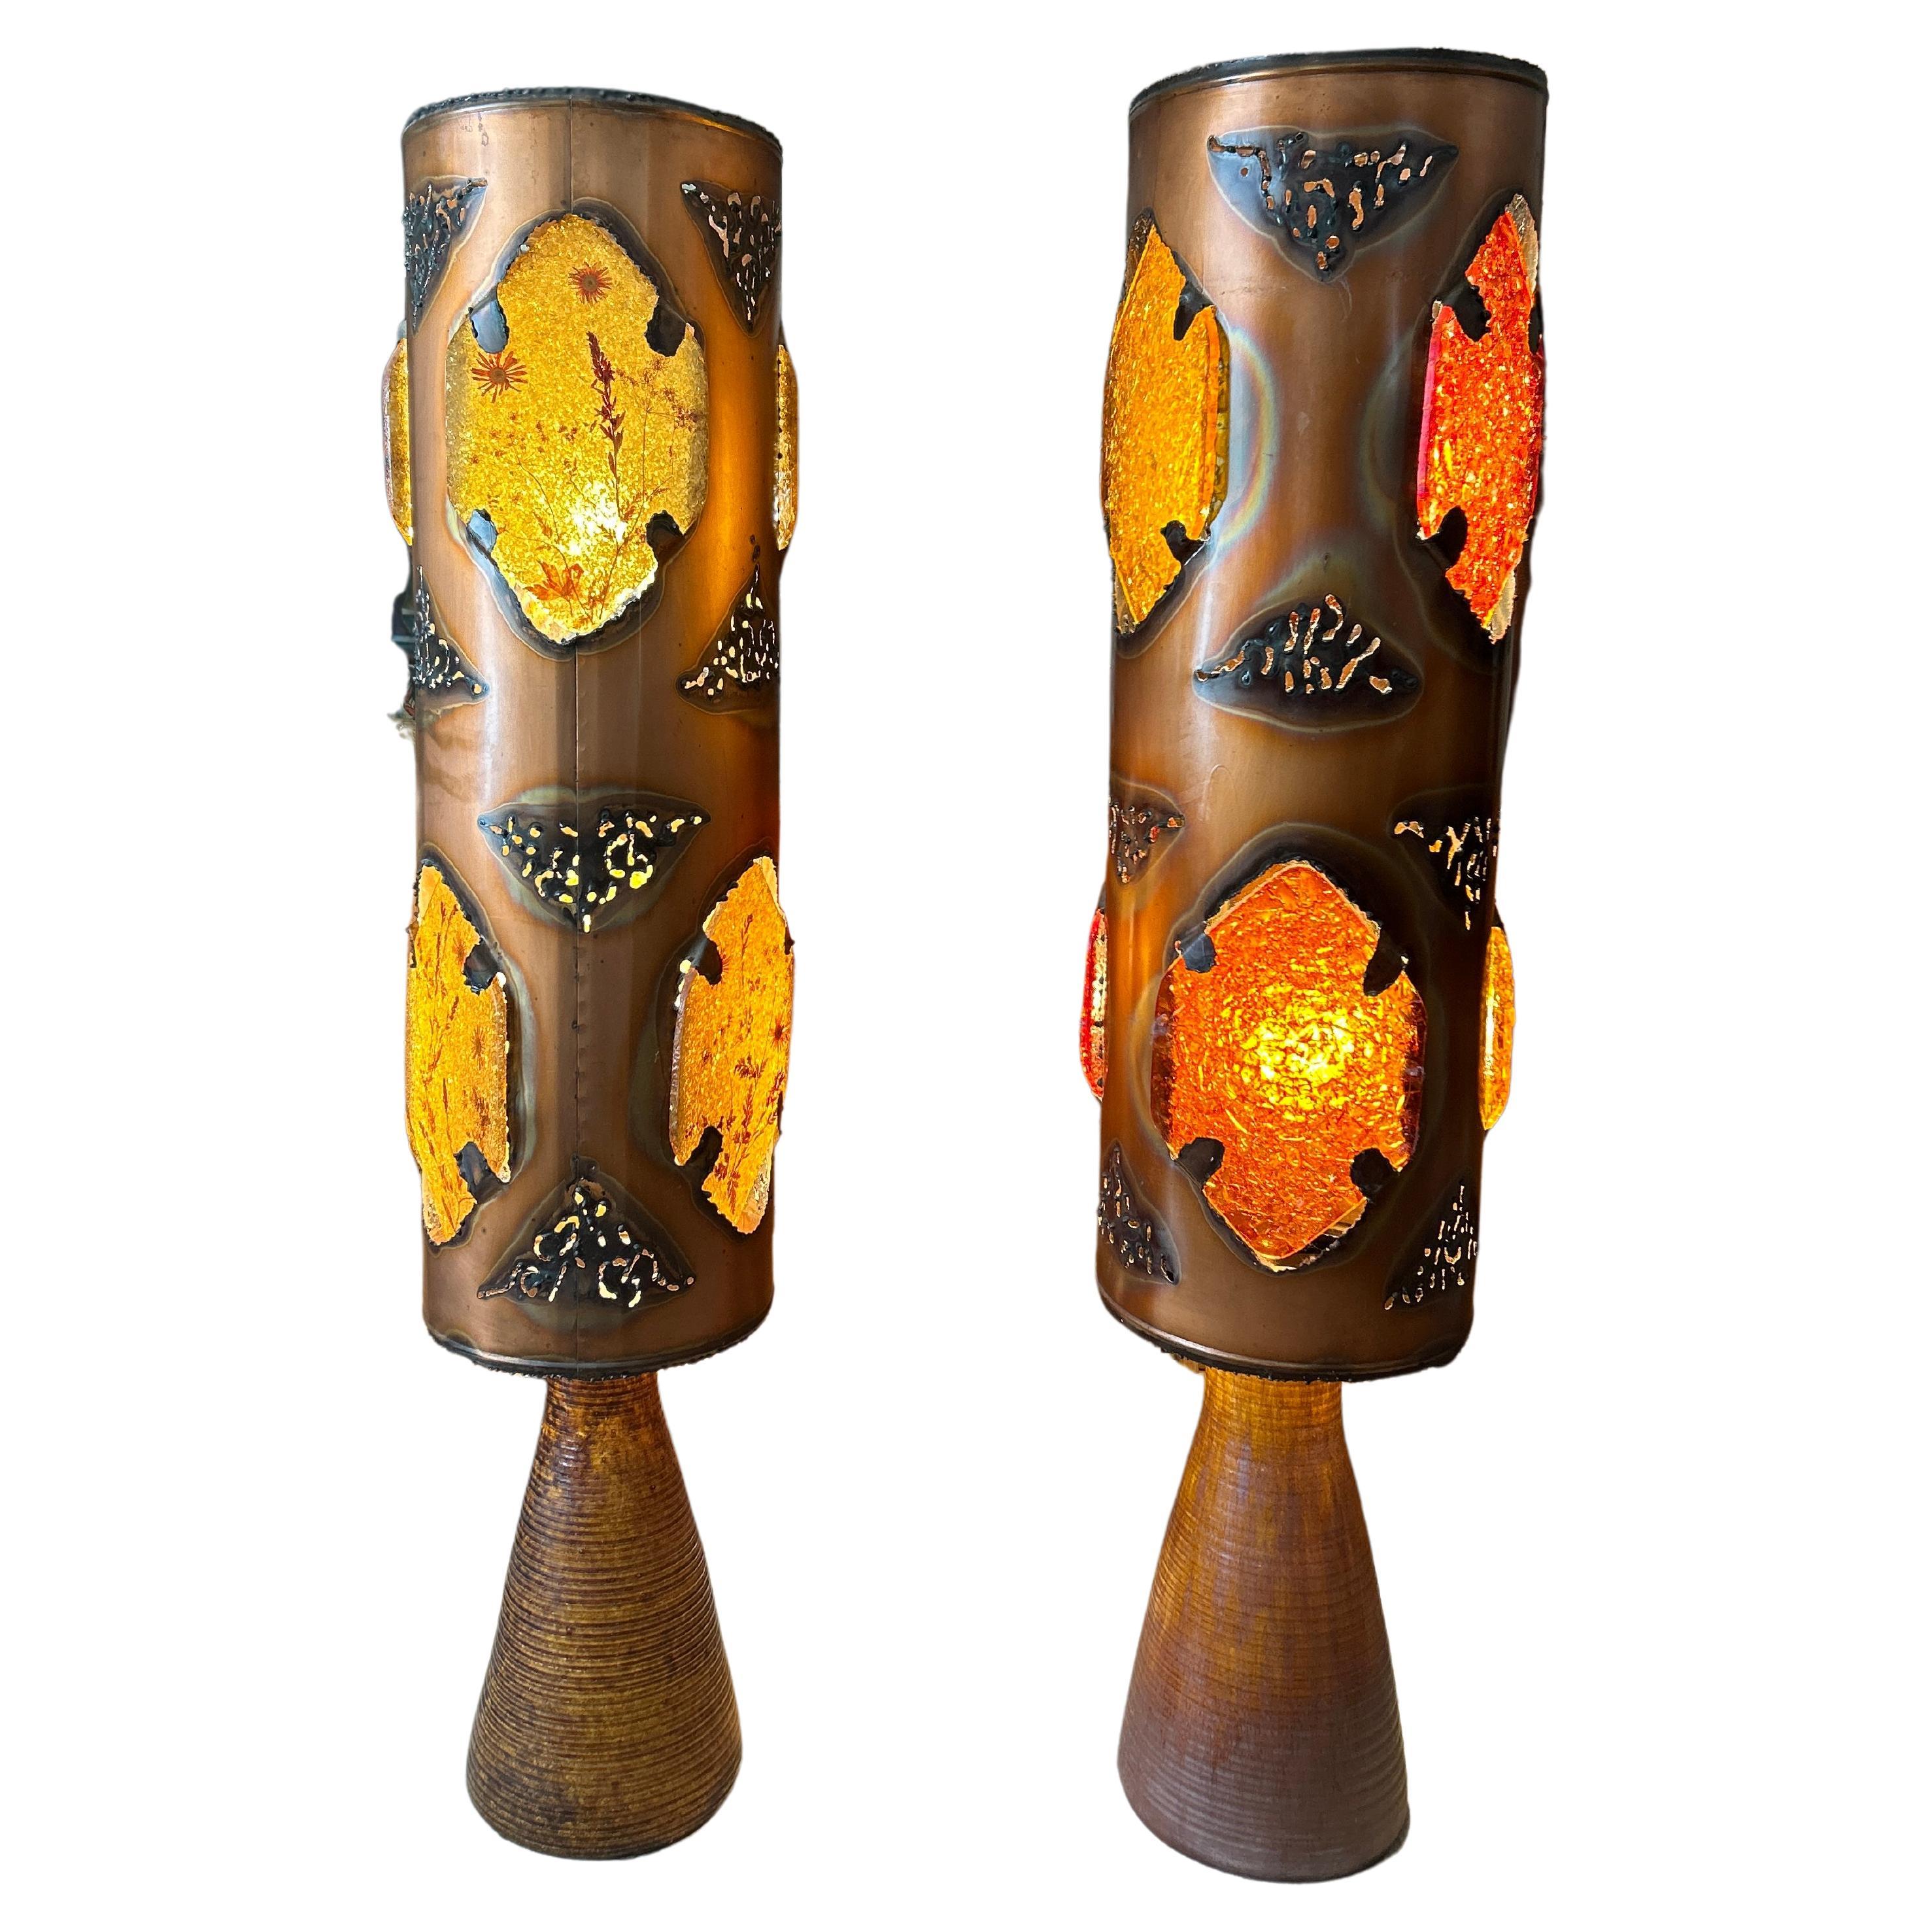 Pair of Accolay floor lamps in ceramic, resin and copper, 1970